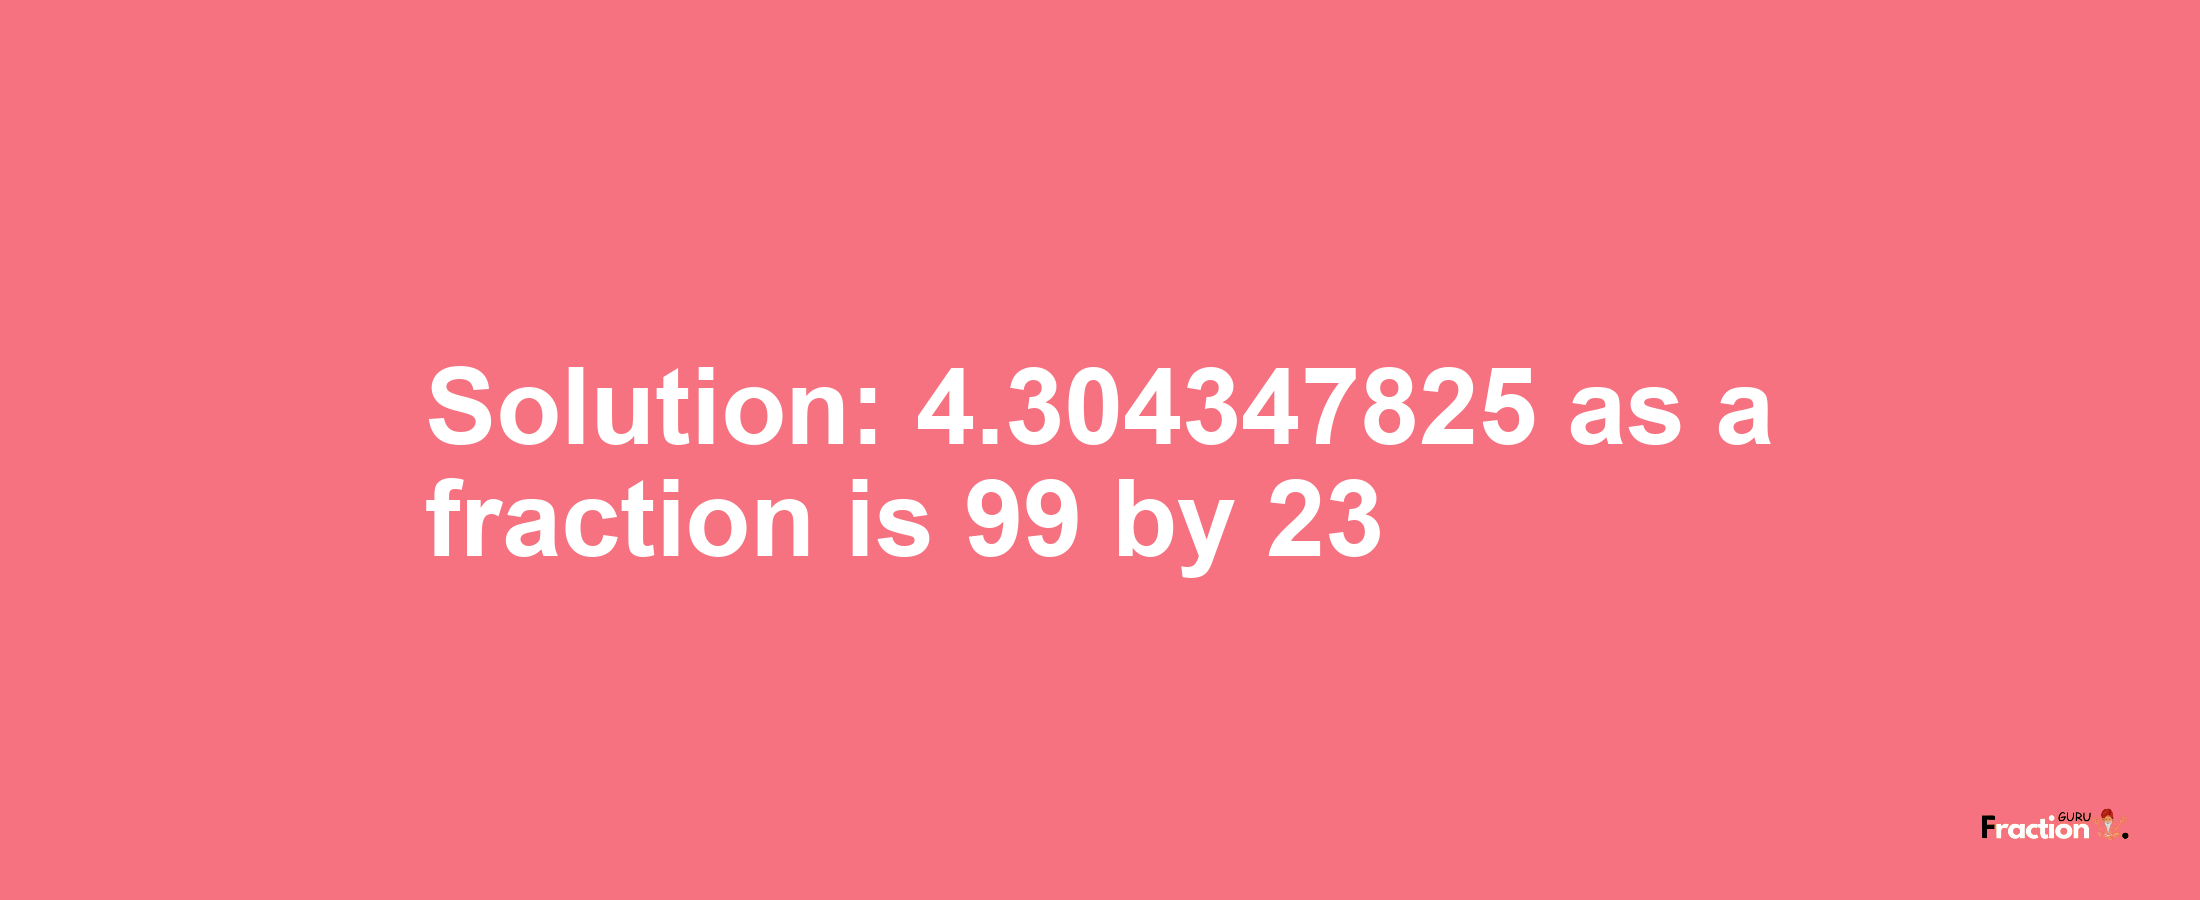 Solution:4.304347825 as a fraction is 99/23